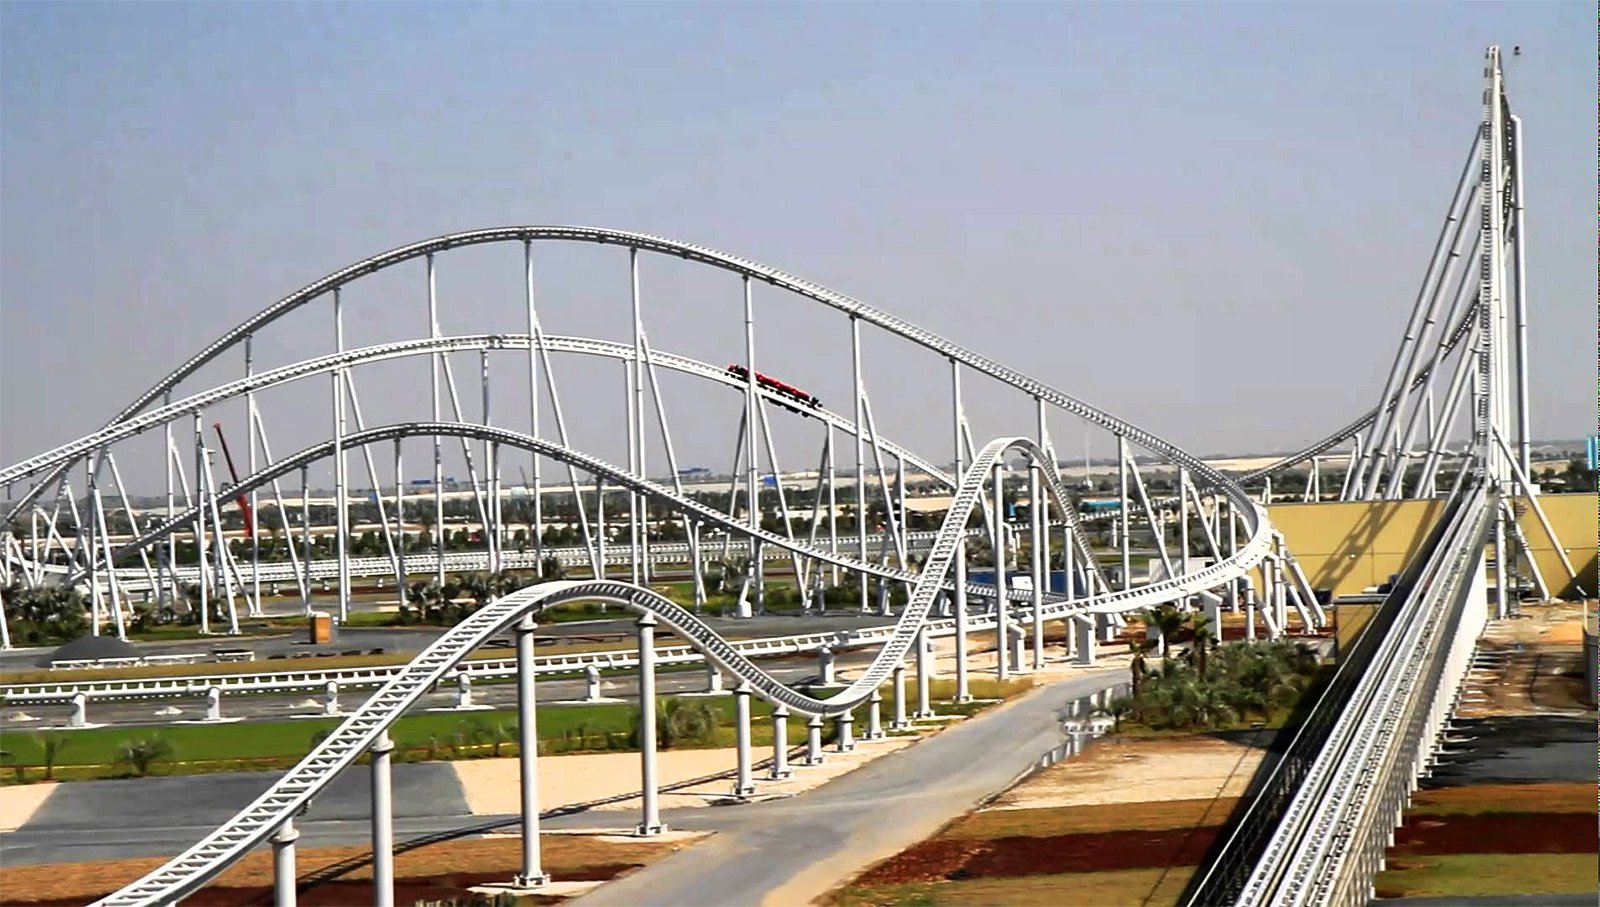 How to ride the most speedy roller coaster in the world in Abu Dhabi